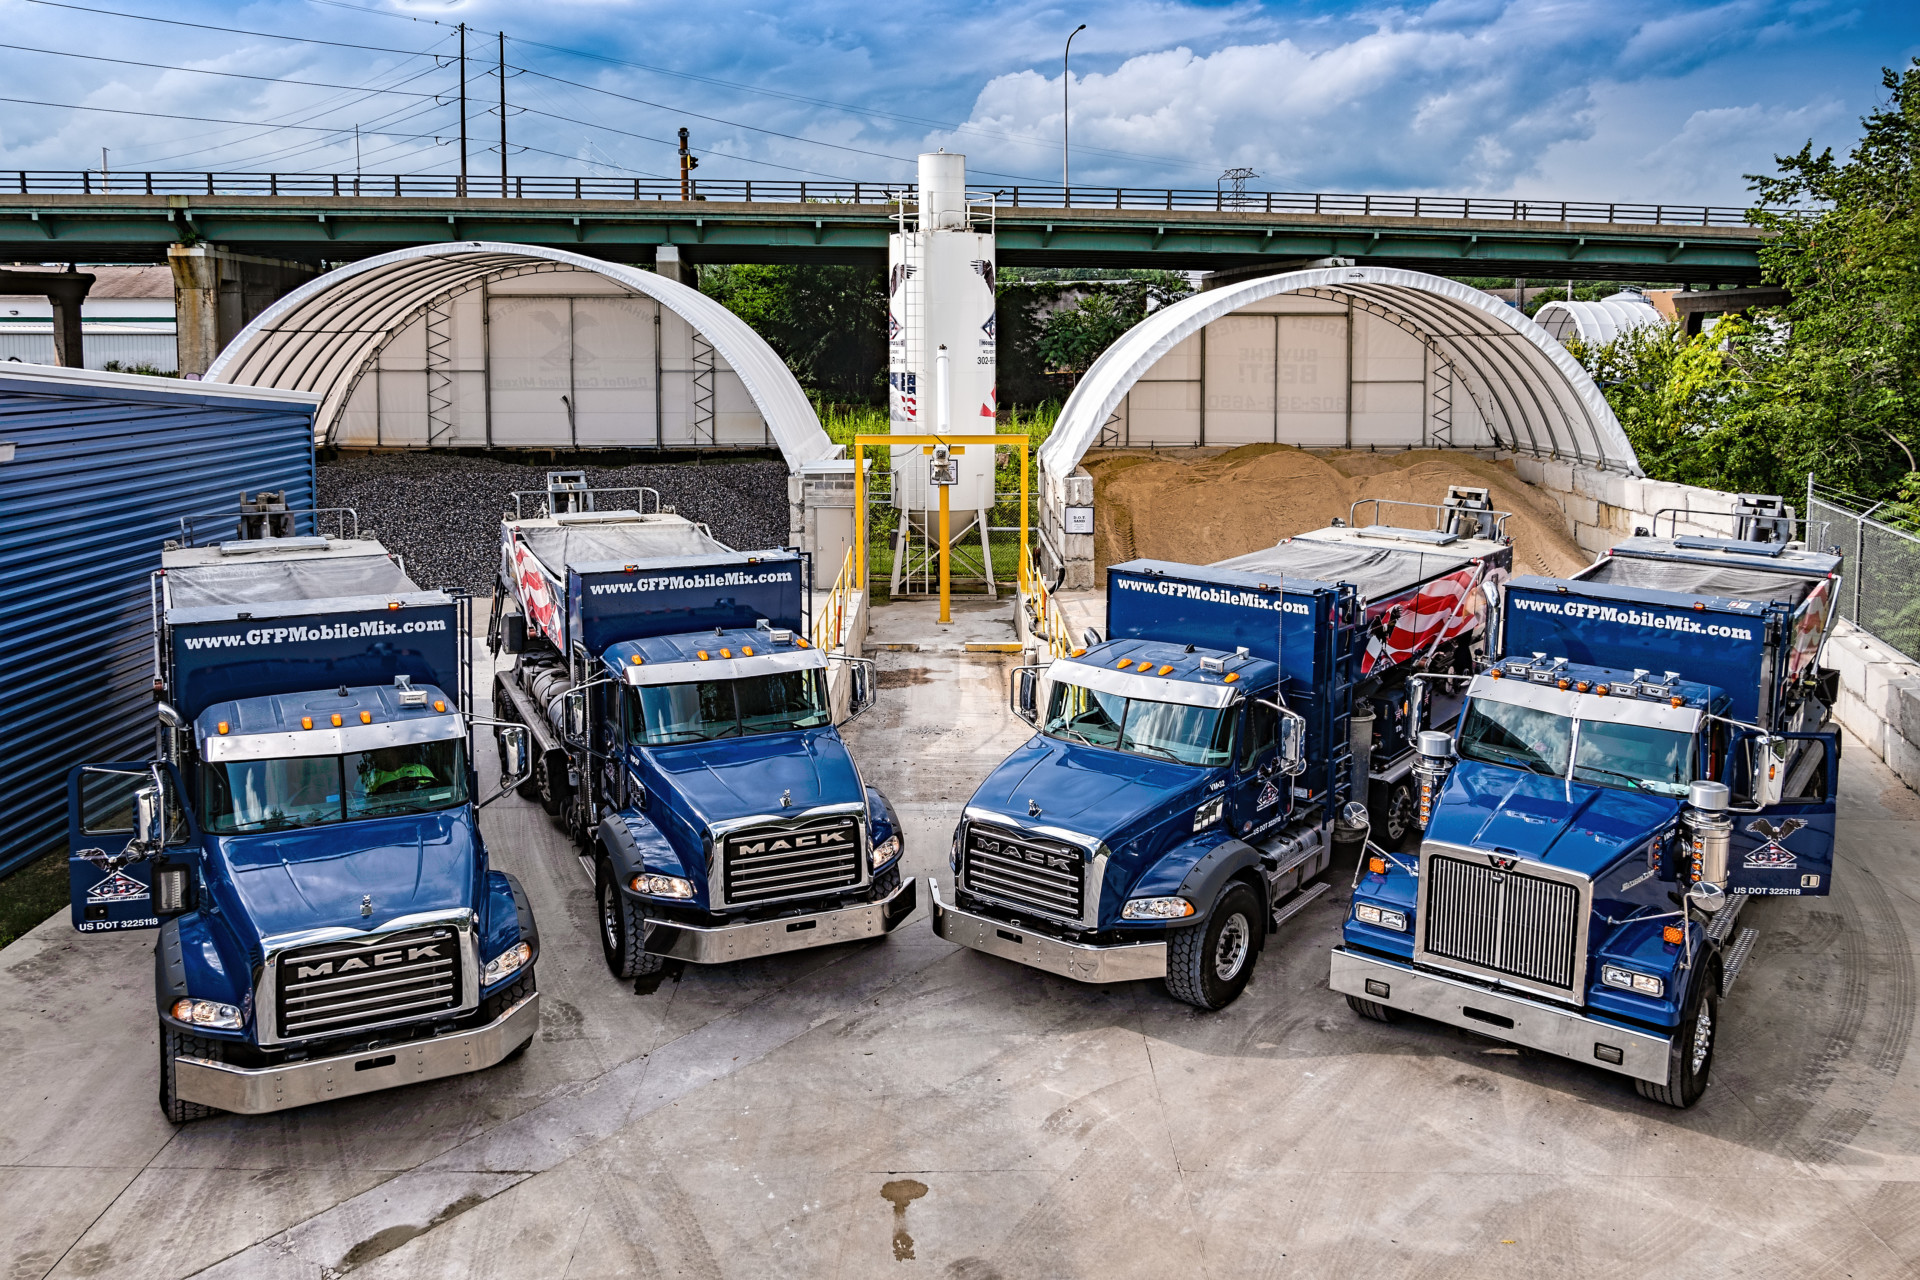 BENEFITS OF USING GFP MOBILE MIXERS VS. READY MIX TRUCKS: